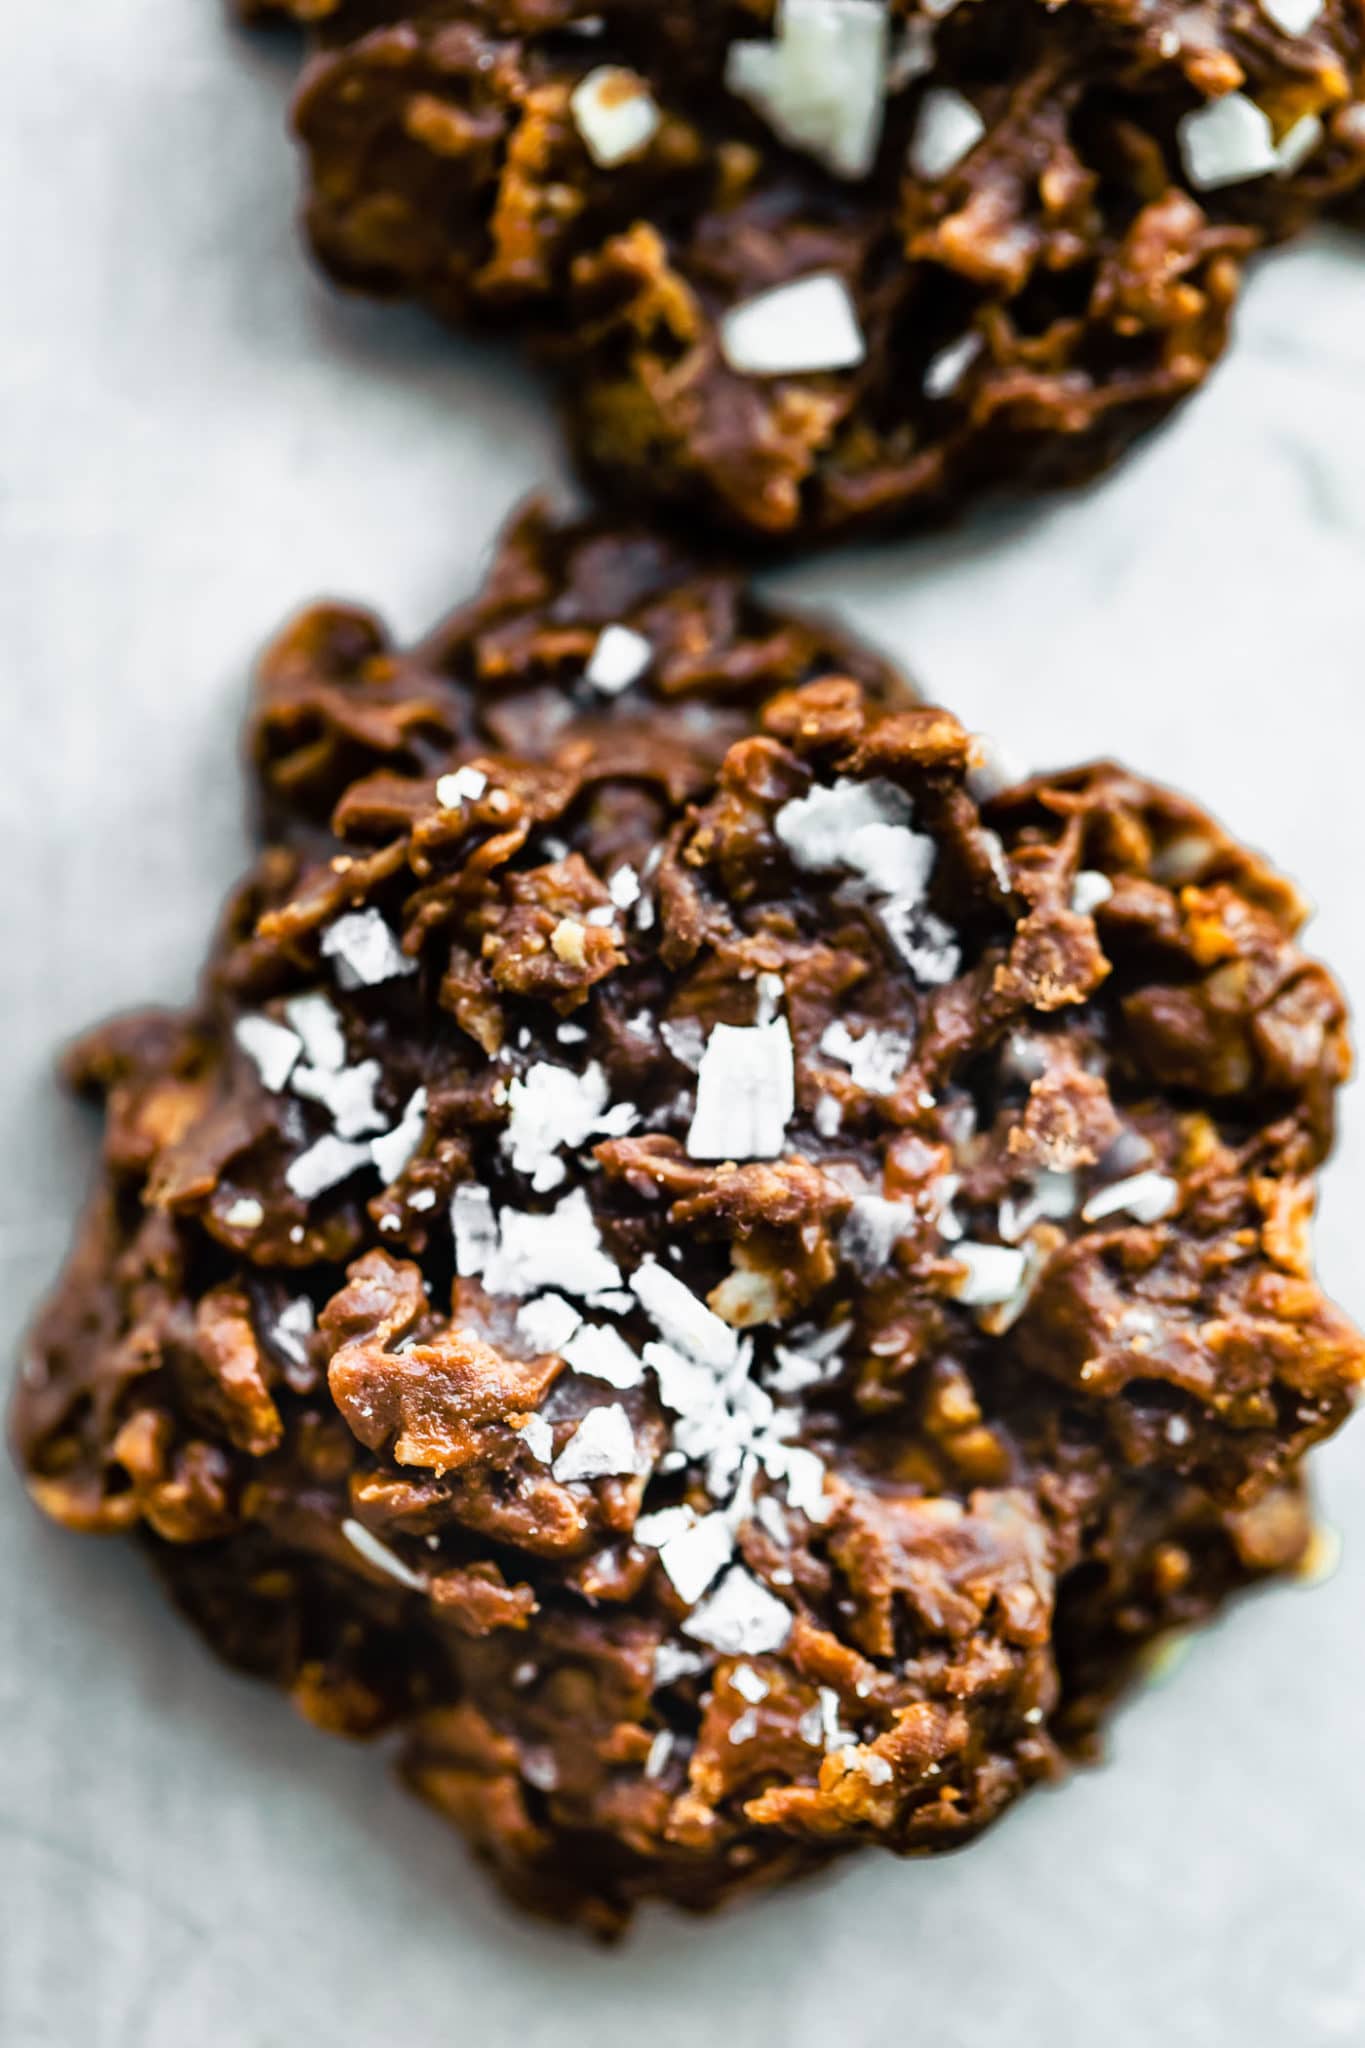 a close up image of a chocolate peanut butter cornflake cookie topped with coconut flakes and sea salt